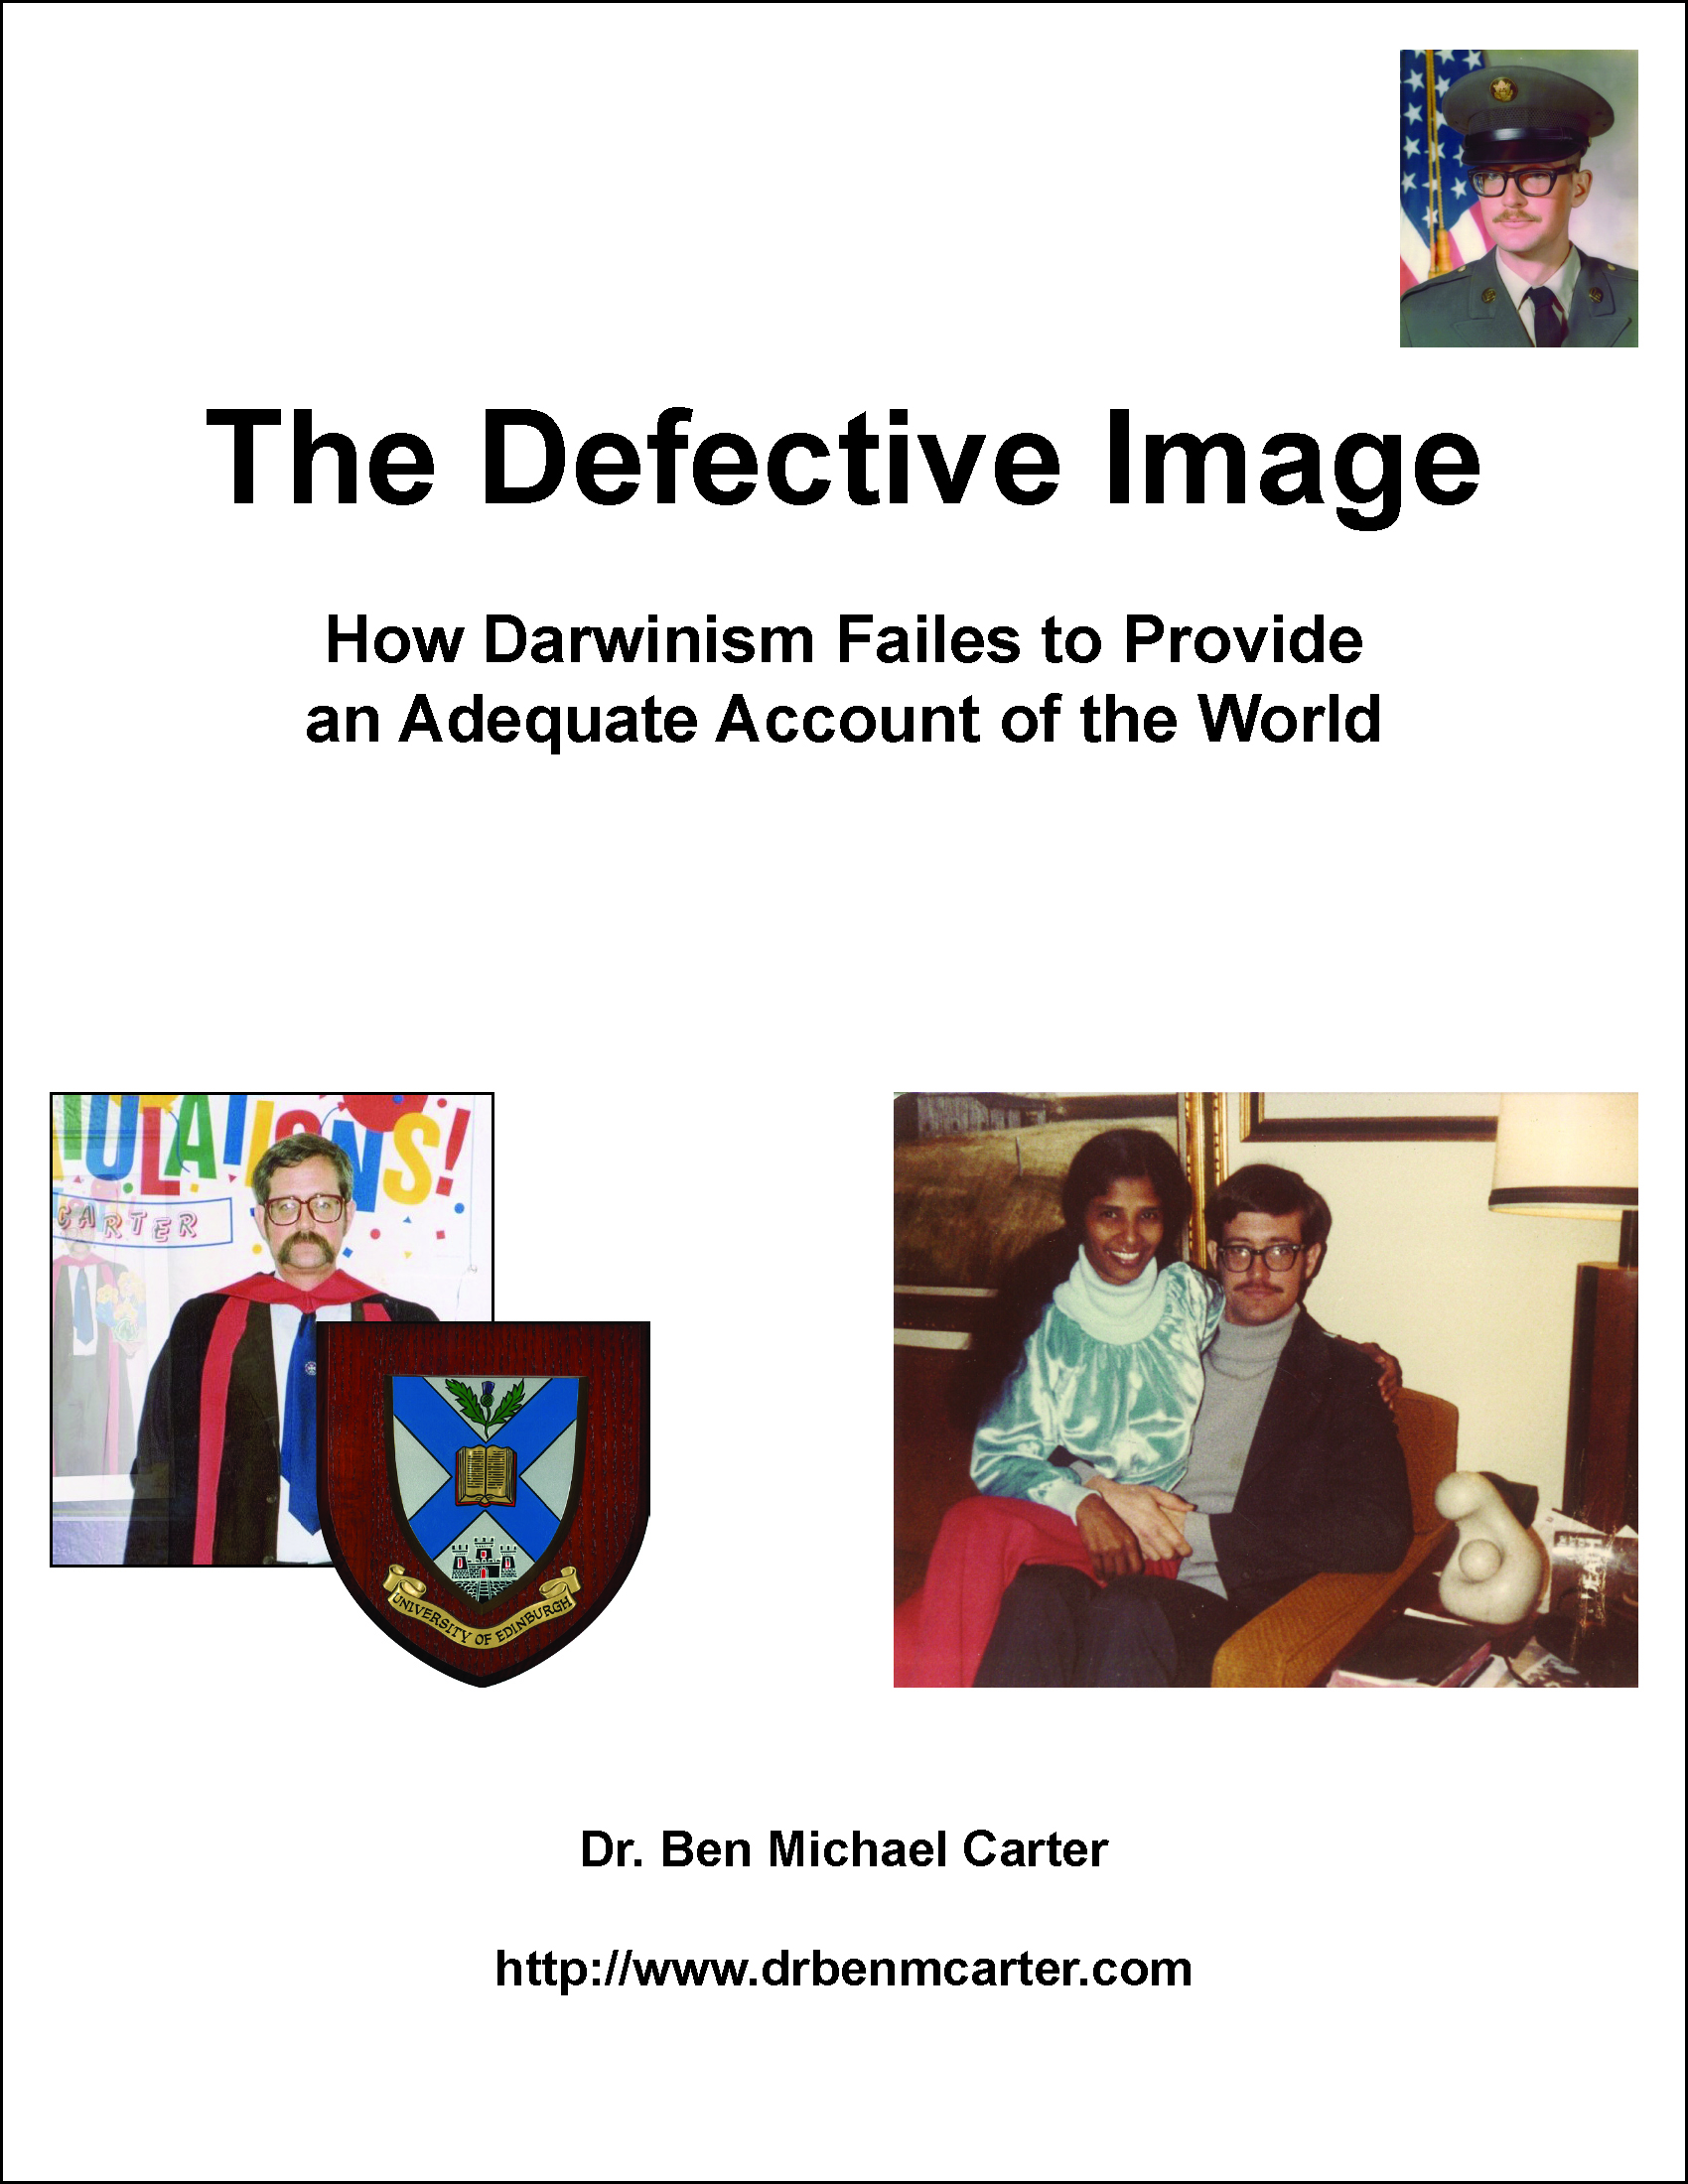 The Defective Image